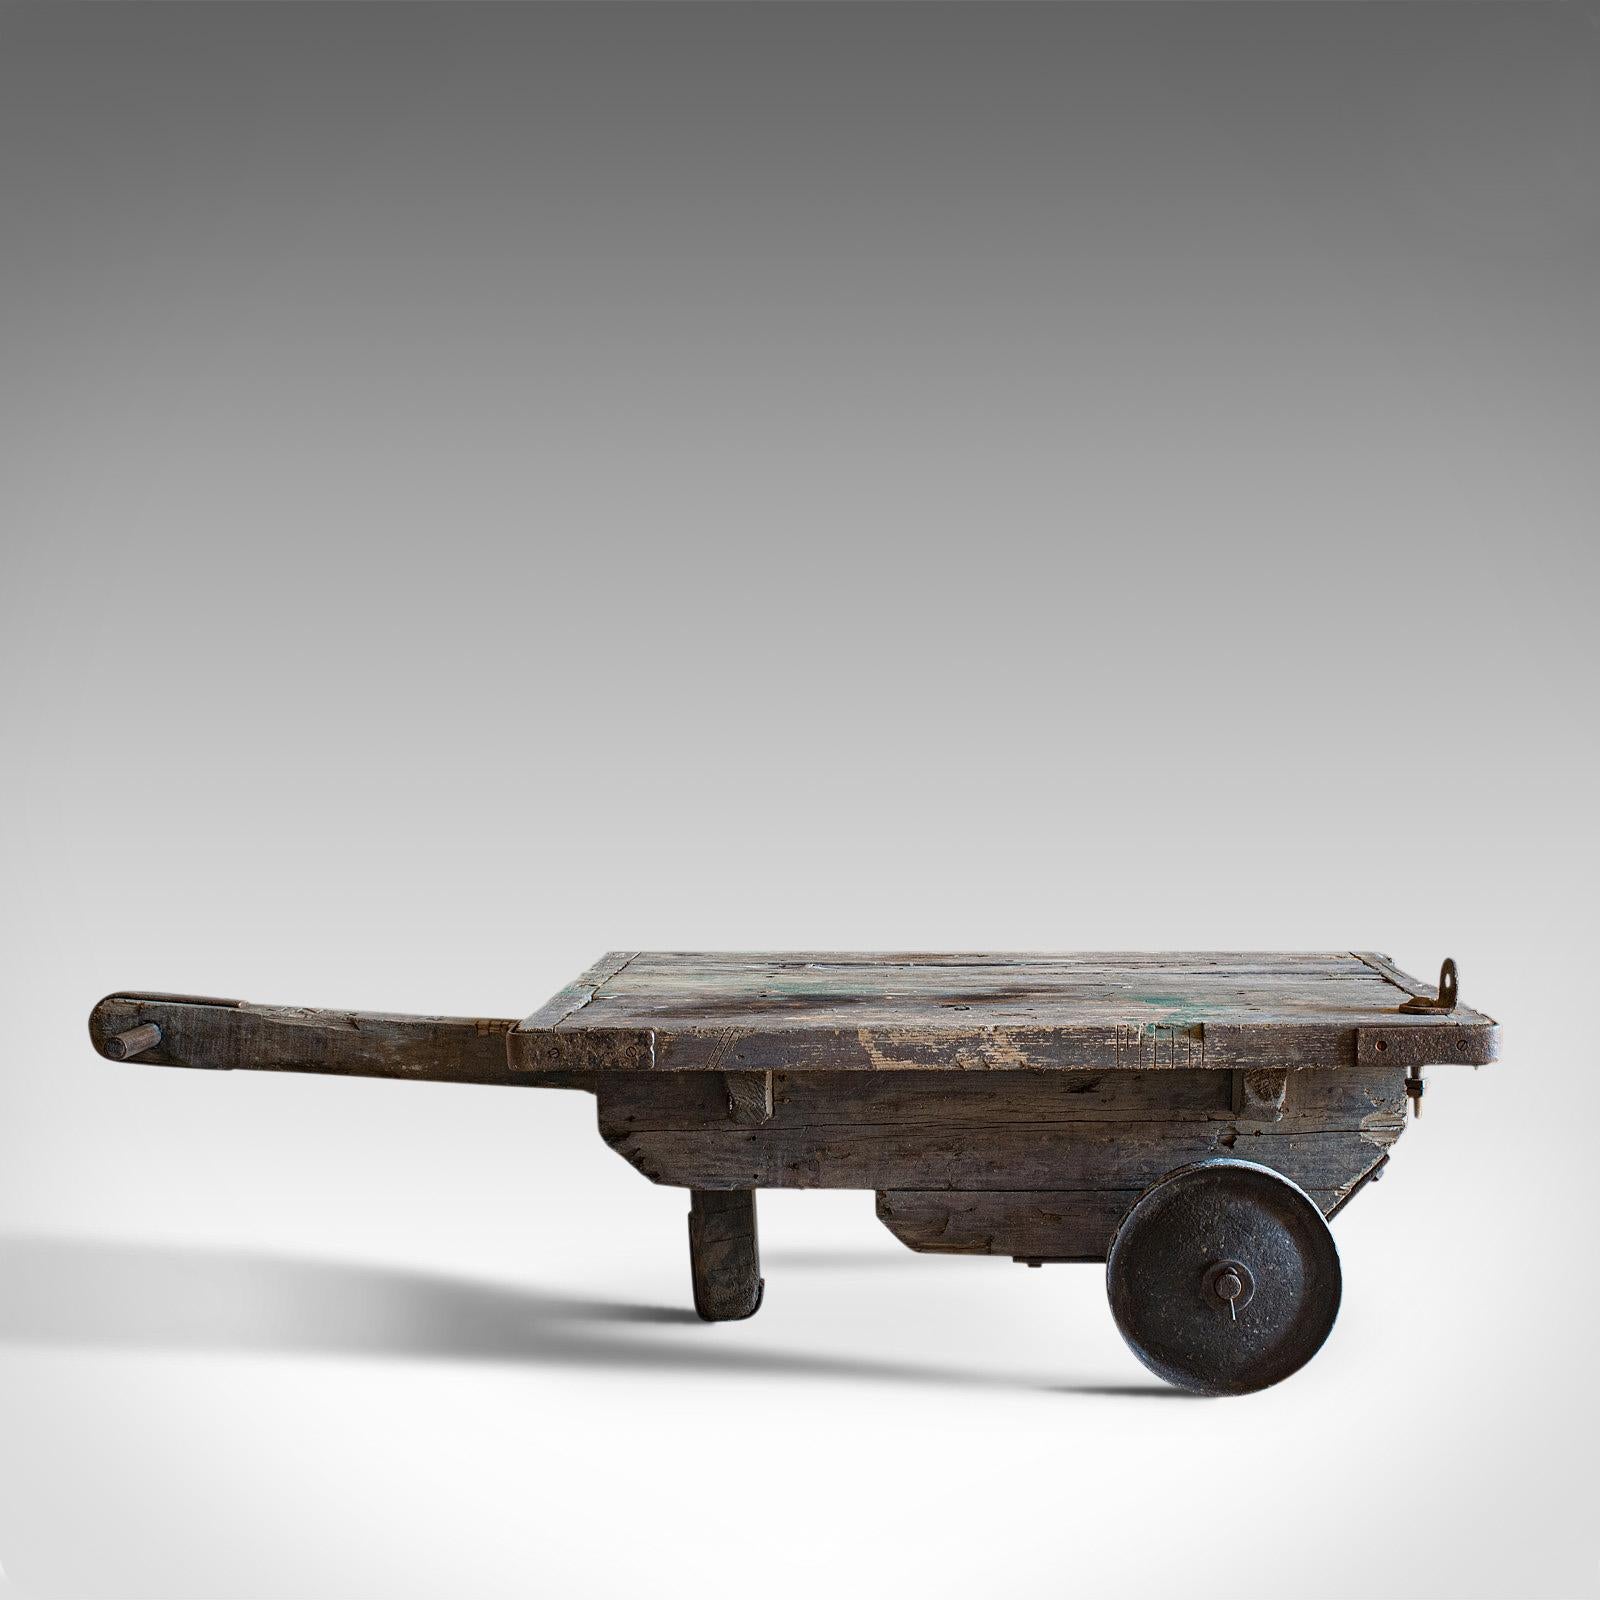 This is an antique industrial porterage trolley. An English, pine railway or factory truck, dating to the early 20th century, circa 1900.

A wonderful antique example of industrial chic
Displays a desirable aged patina
Original pine in good